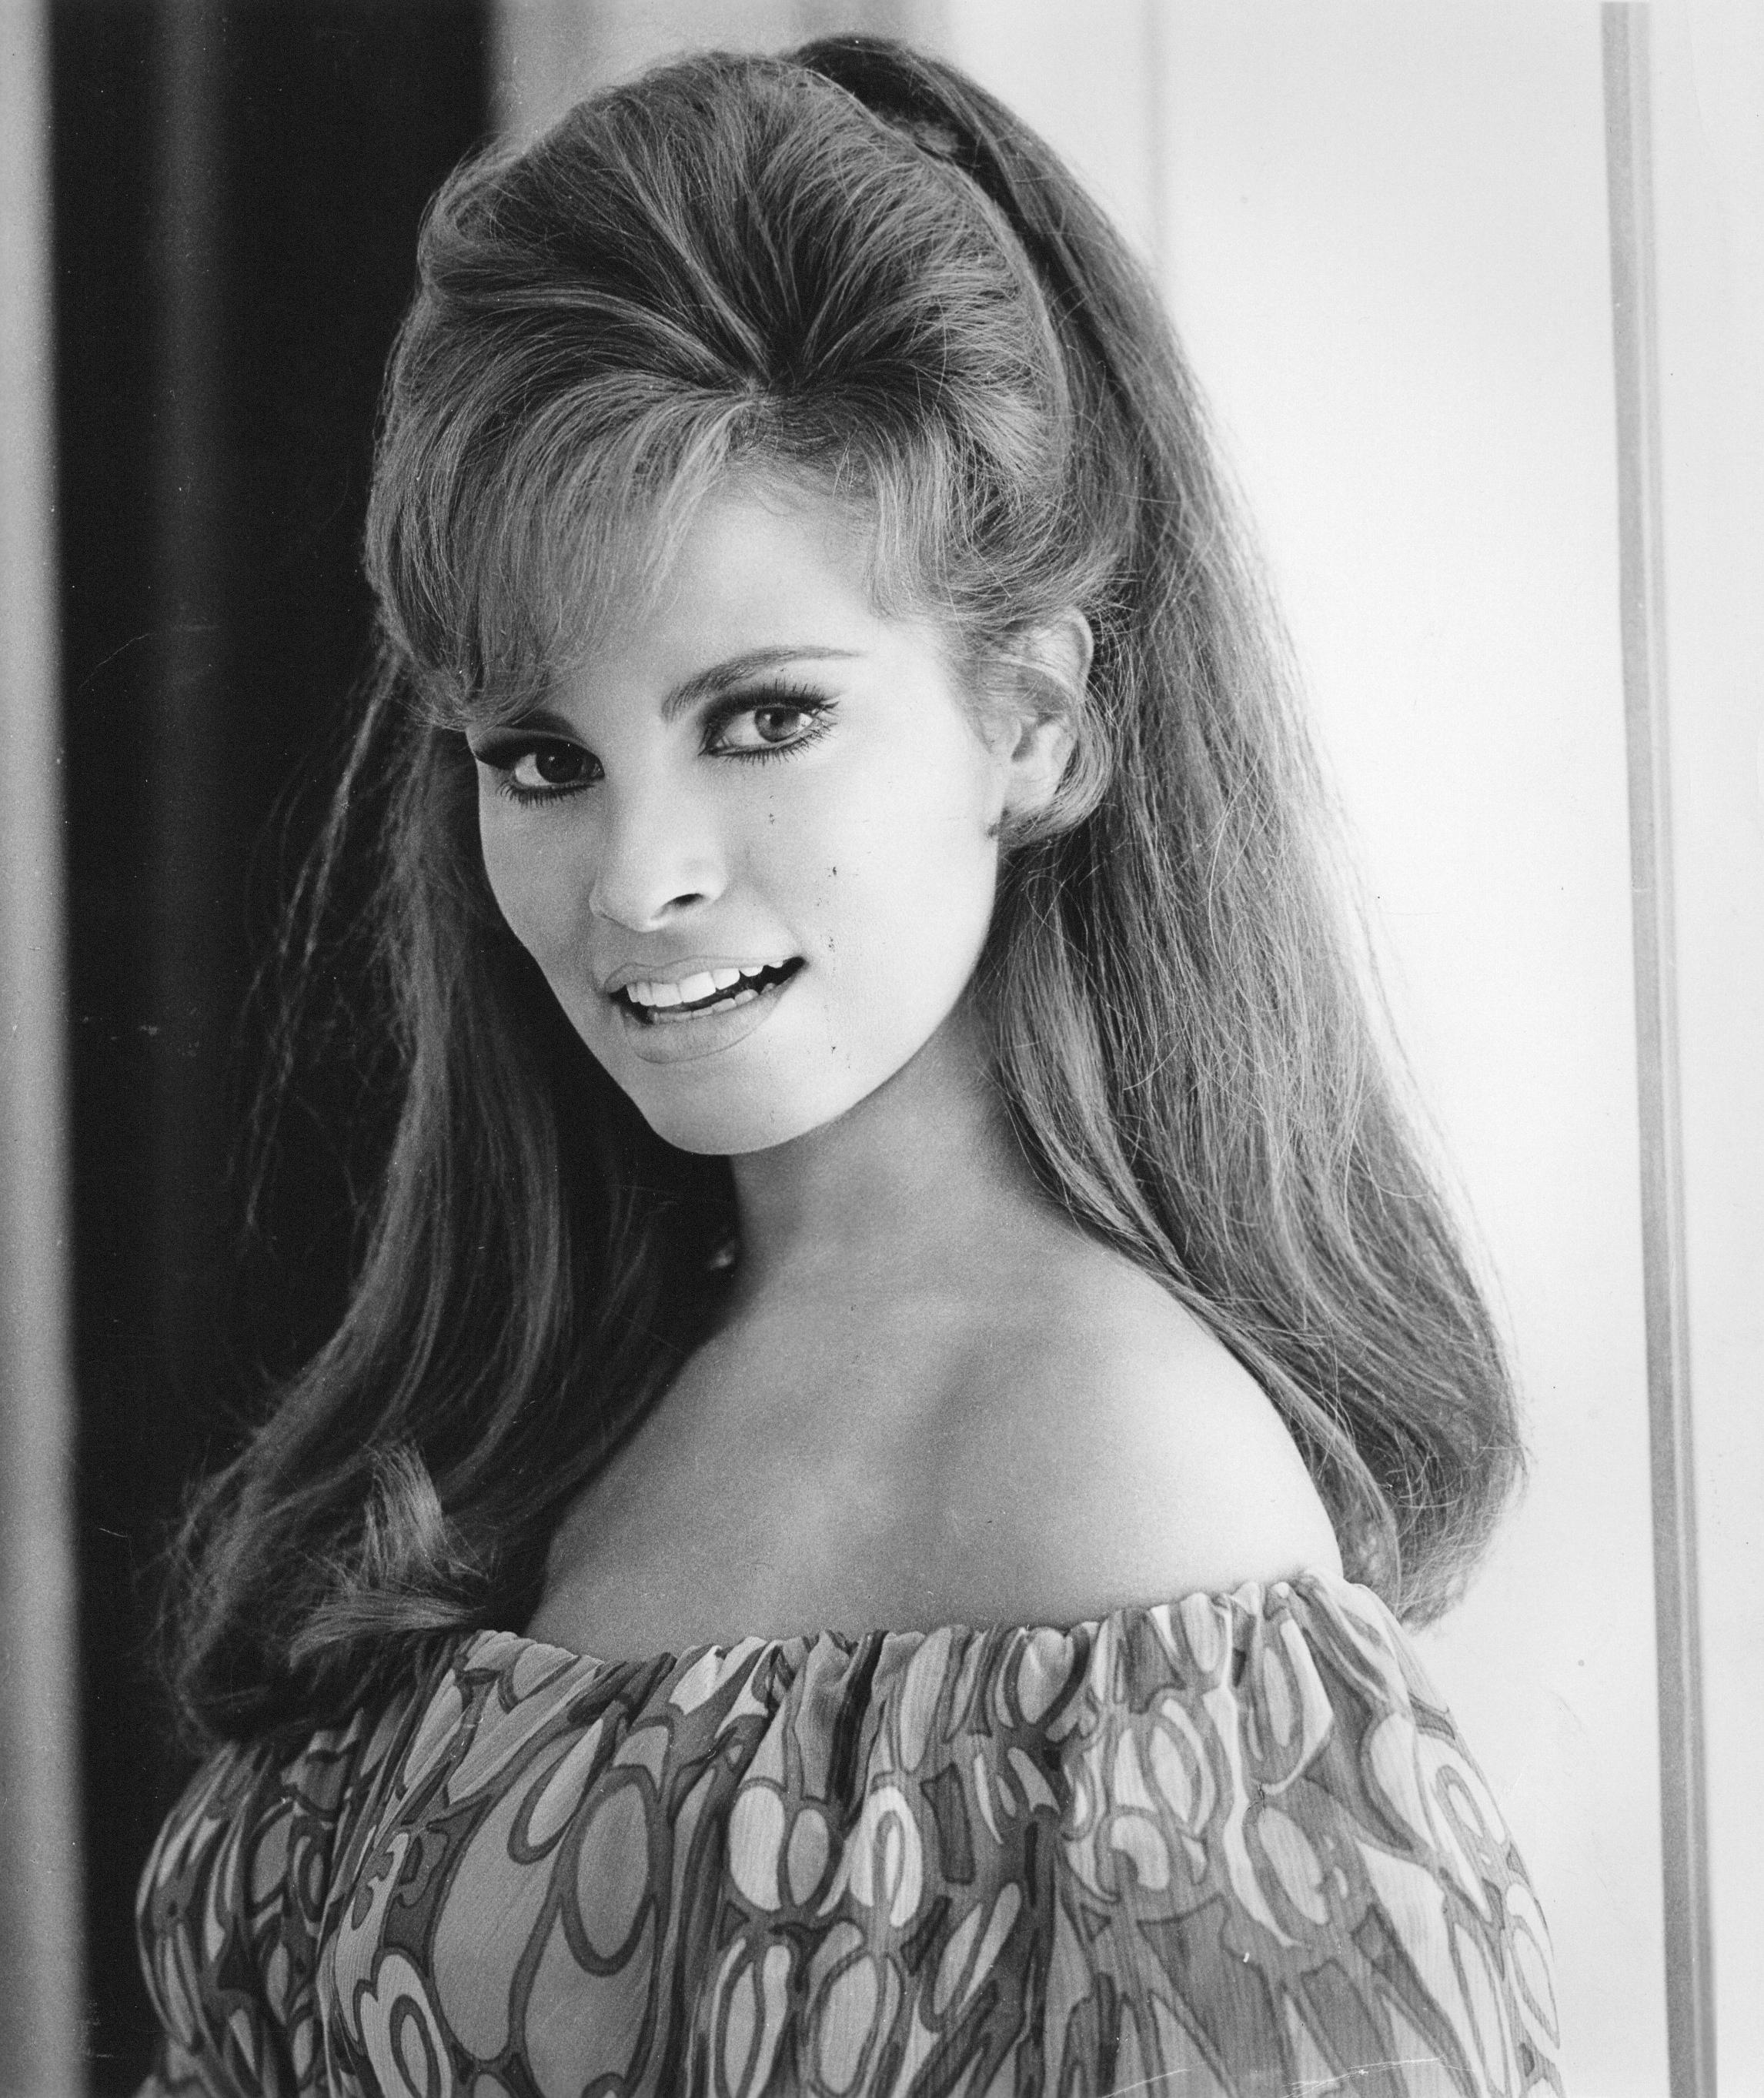 Unknown Black and White Photograph - Raquel Welch Smiling Vintage Original Photograph